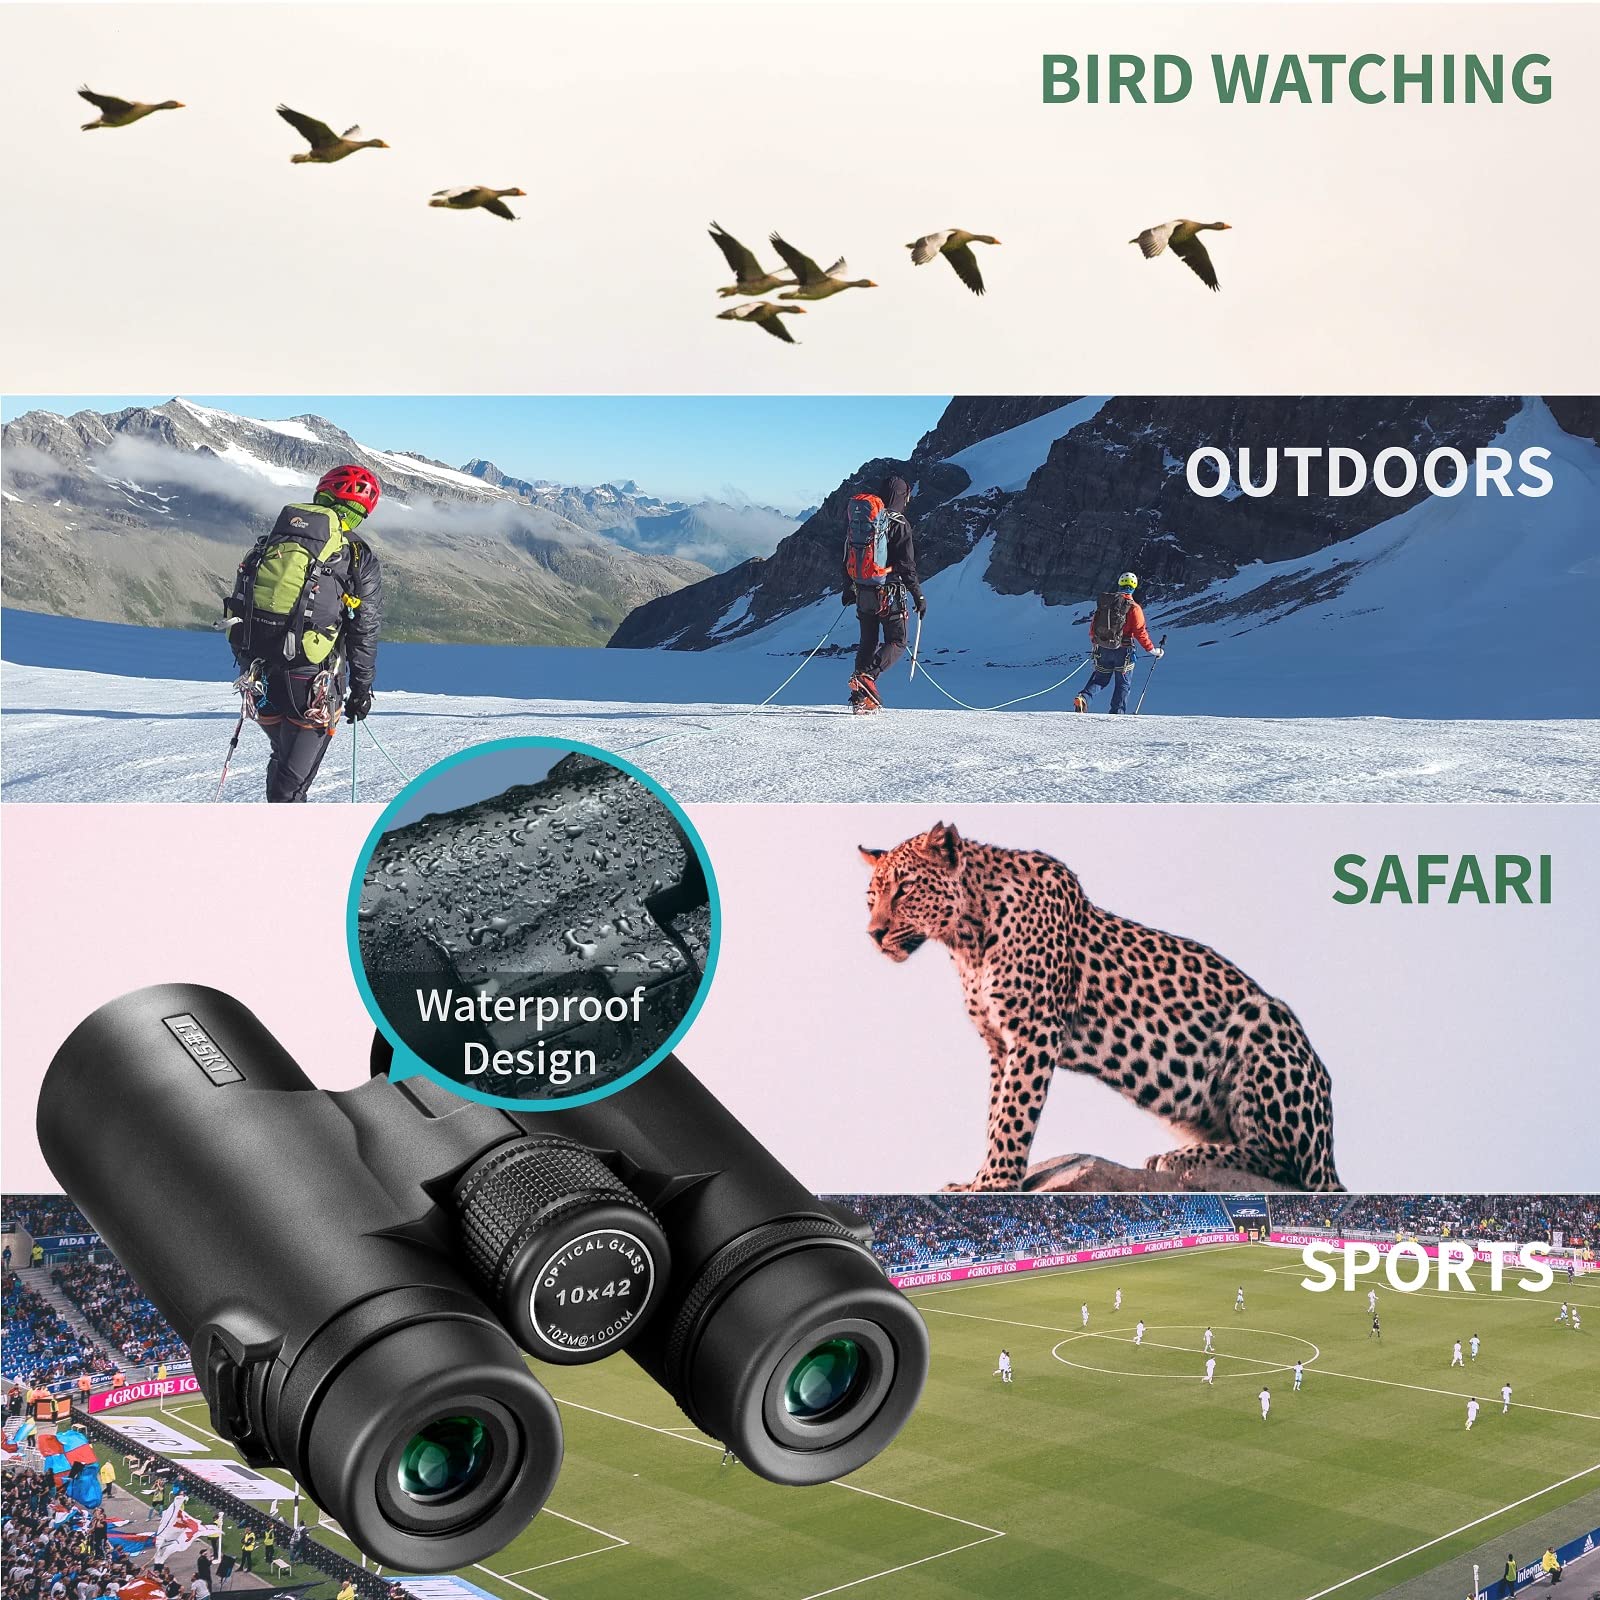 Gosky 10x42 Roof Prism Binoculars for Adults, HD Professional Binoculars for Bird Watching Travel Stargazing Hunting Concerts Sports-BAK4 Prism FMC Lens-with Phone Mount Strap Carrying Bag